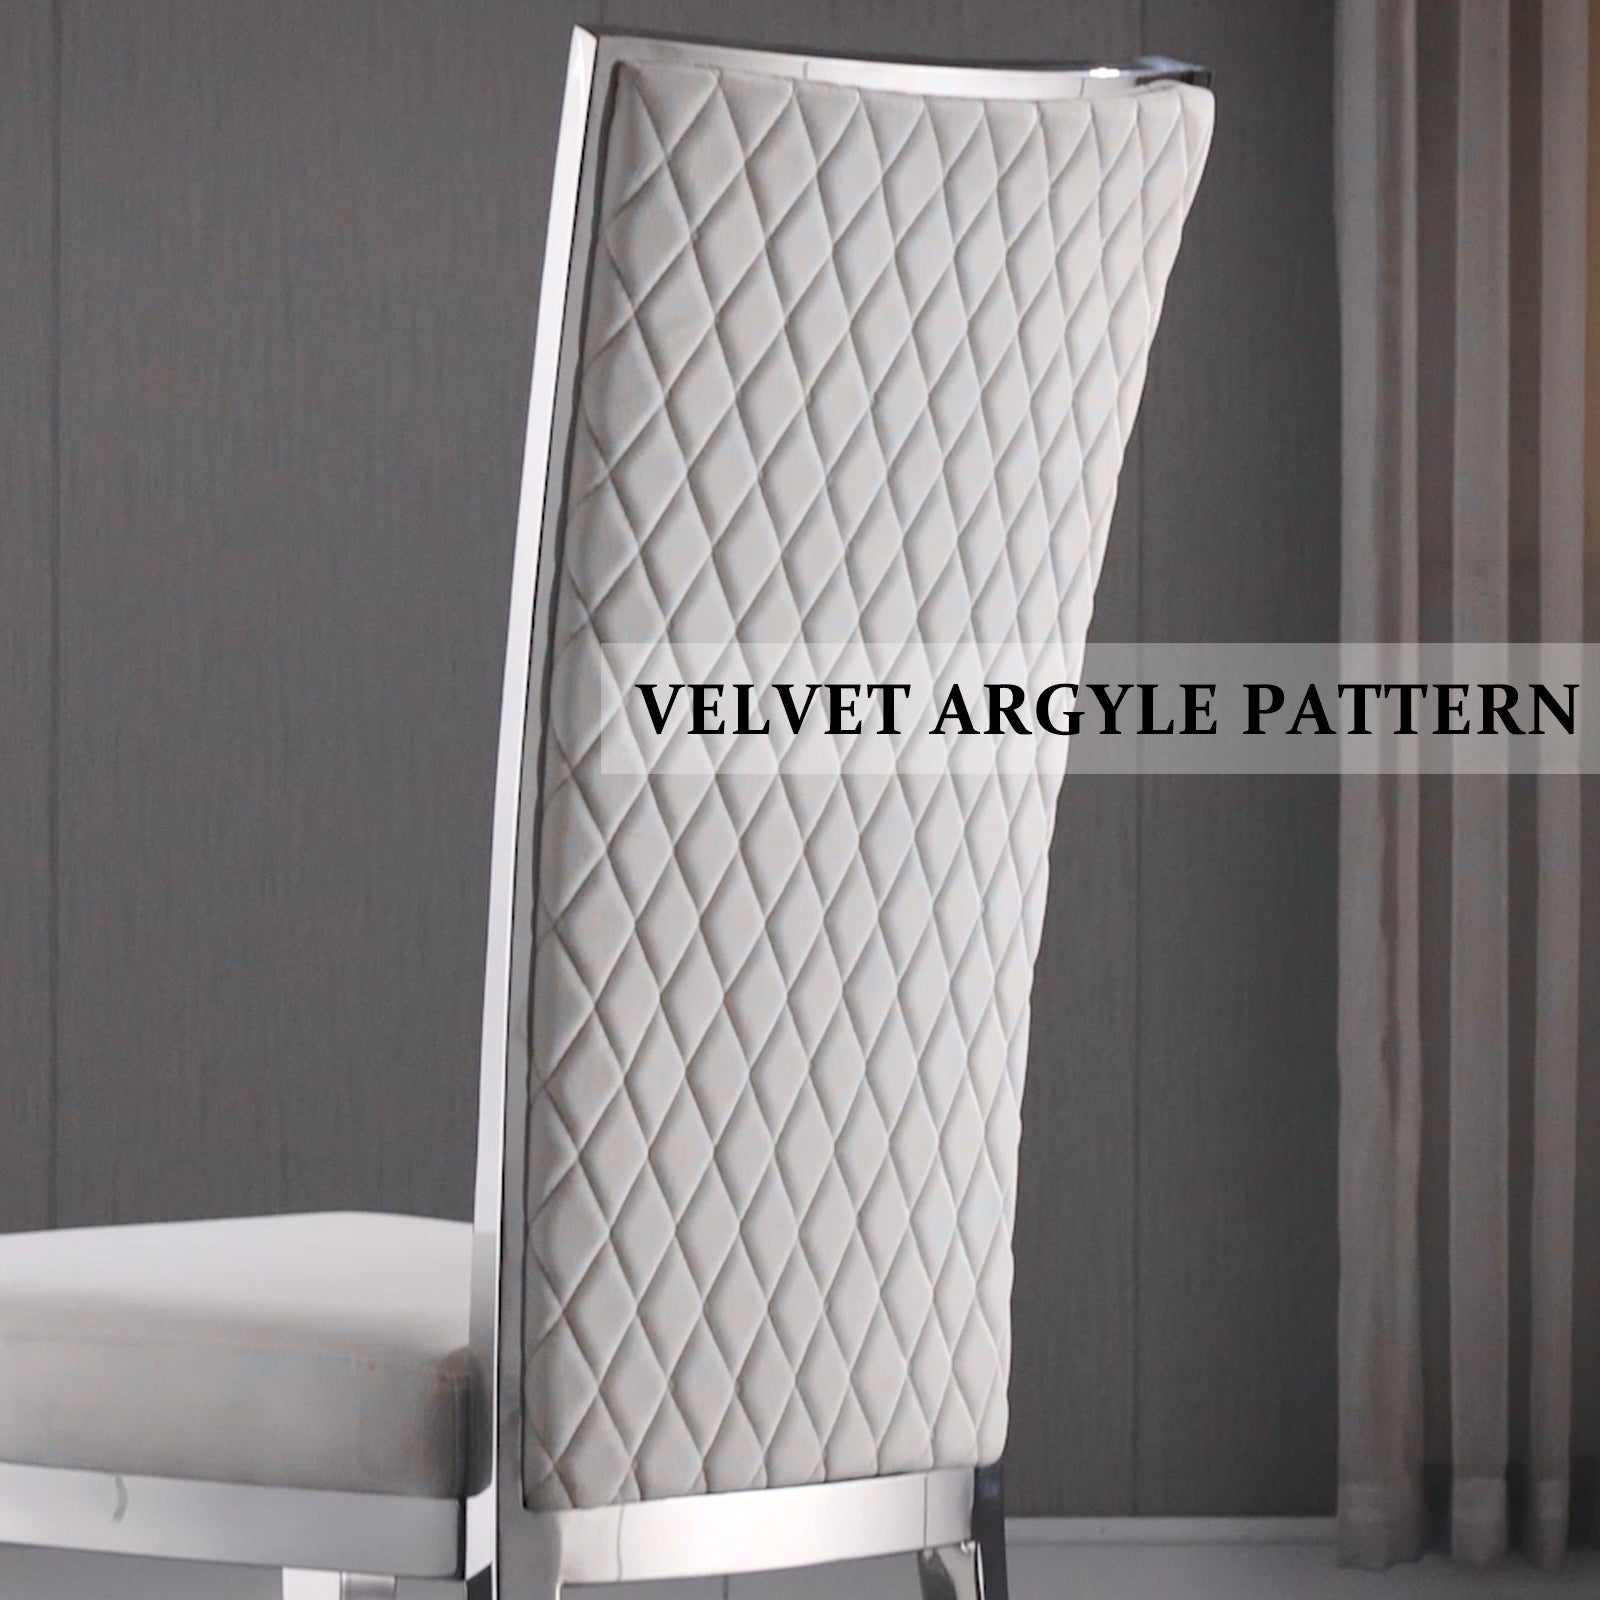 White velvet Dining Chairs | Hand-stitched diamond High Back | C153